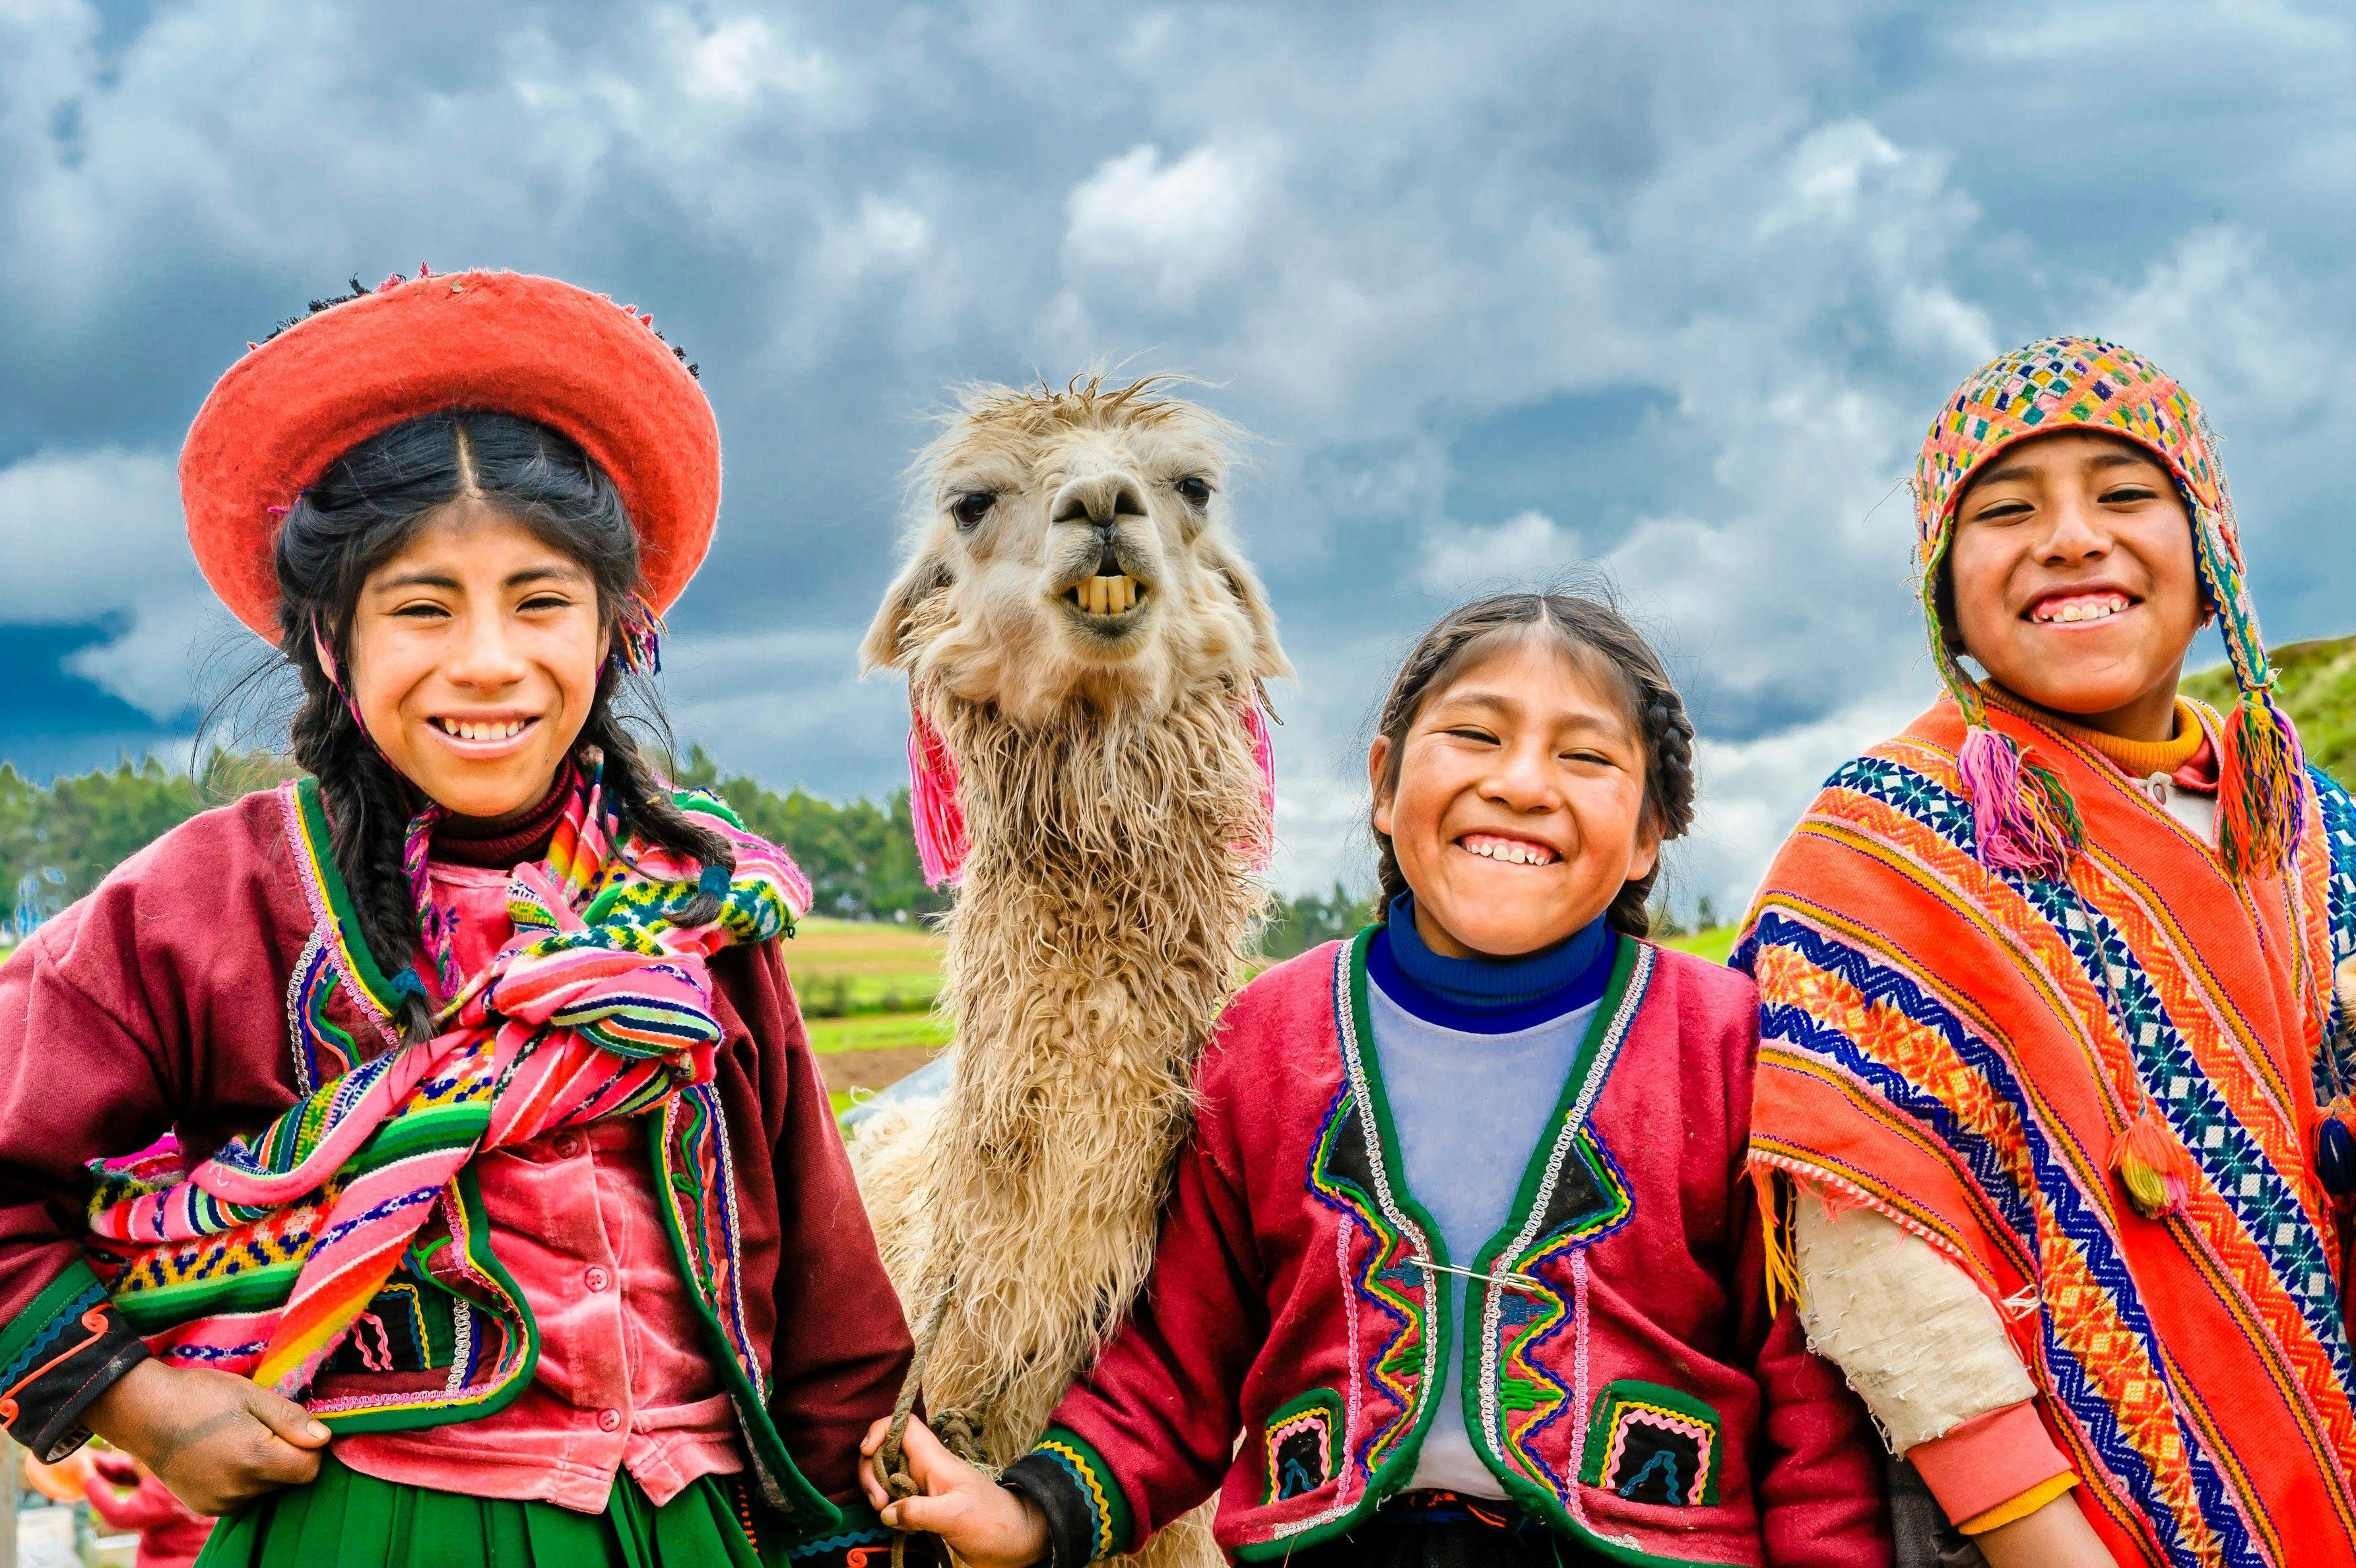 Local children in traditional clothing smiling in camera in Peru.